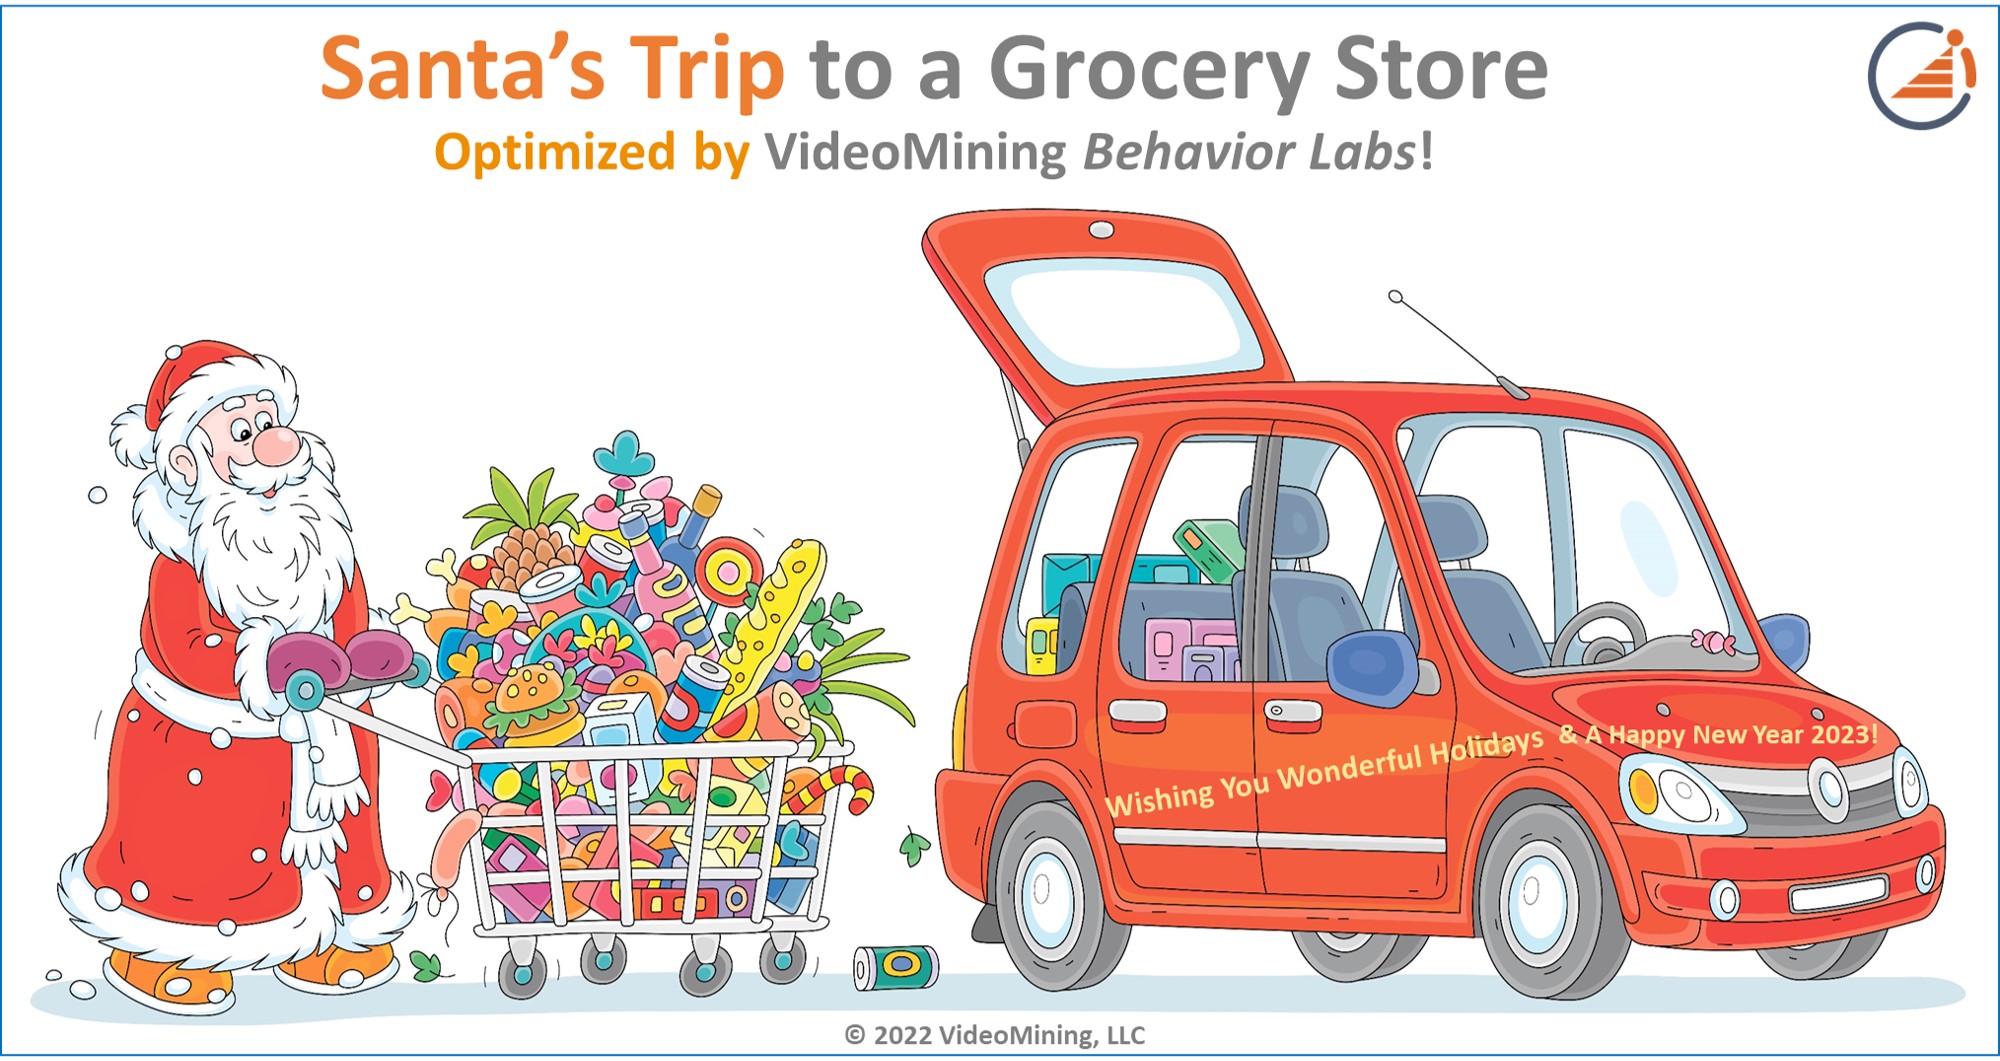 Santa’s Trip to a Grocery Store (Optimized by VideoMining Behavior Labs!)